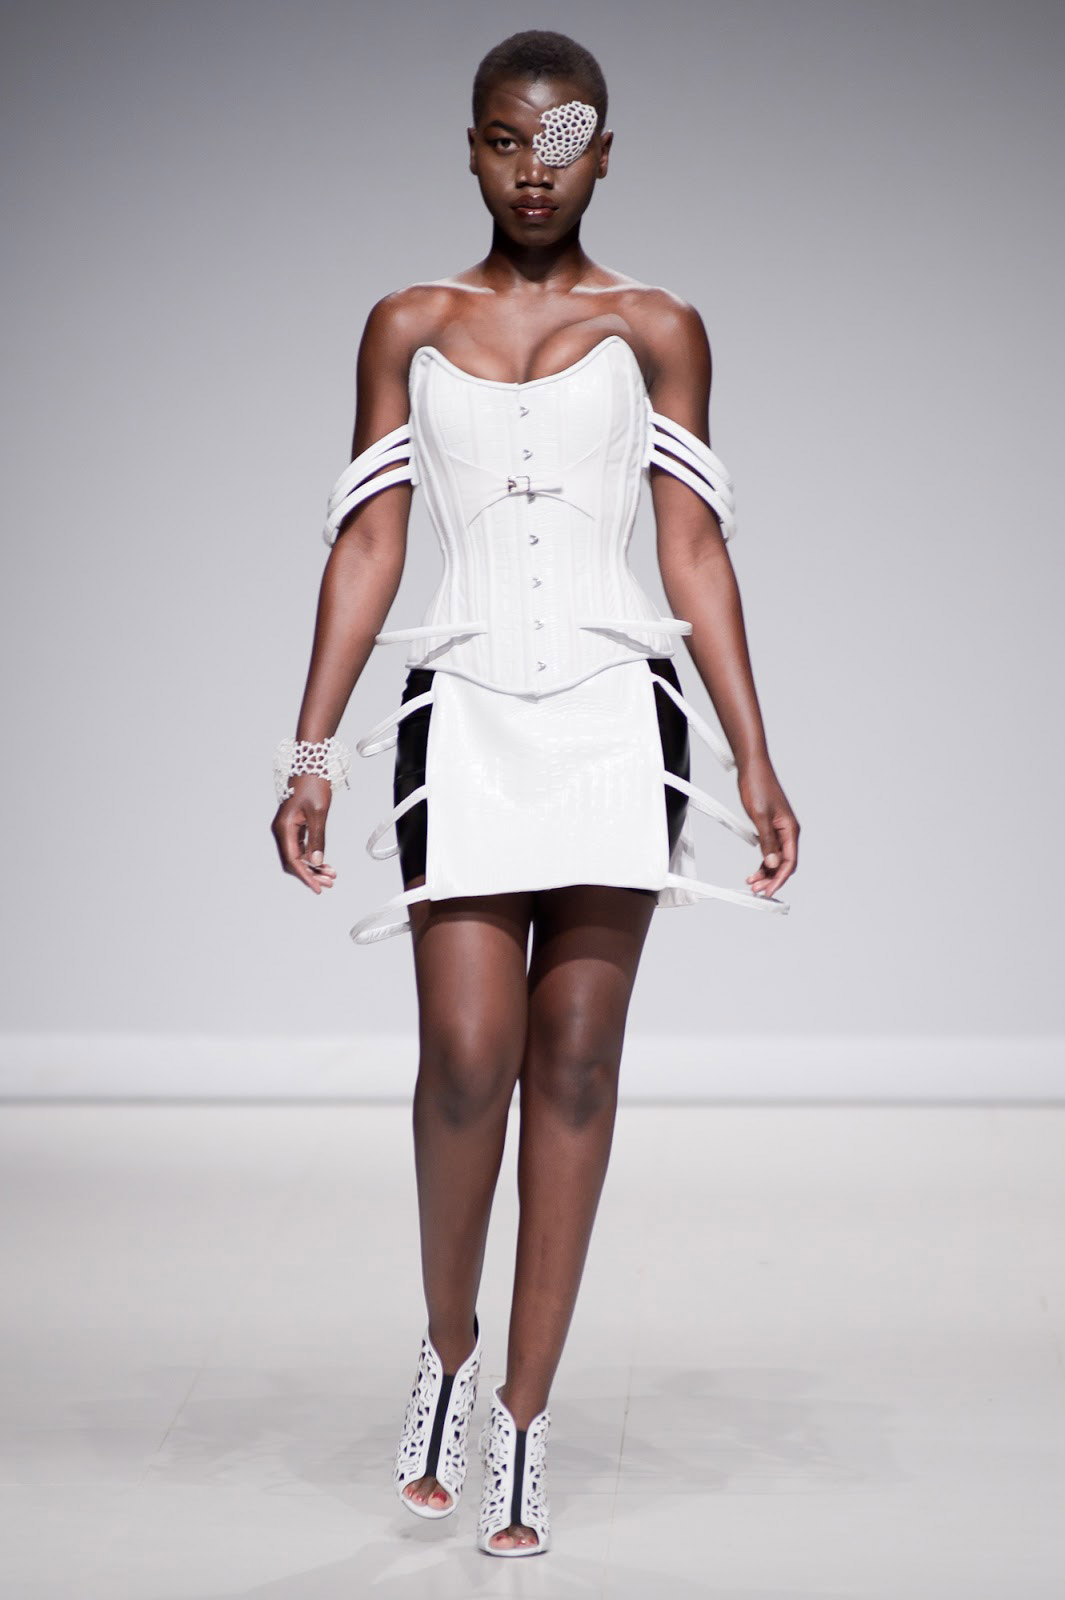 Toronto's Starkers Corsetry shows sci-fi inspired line at FAT 2014